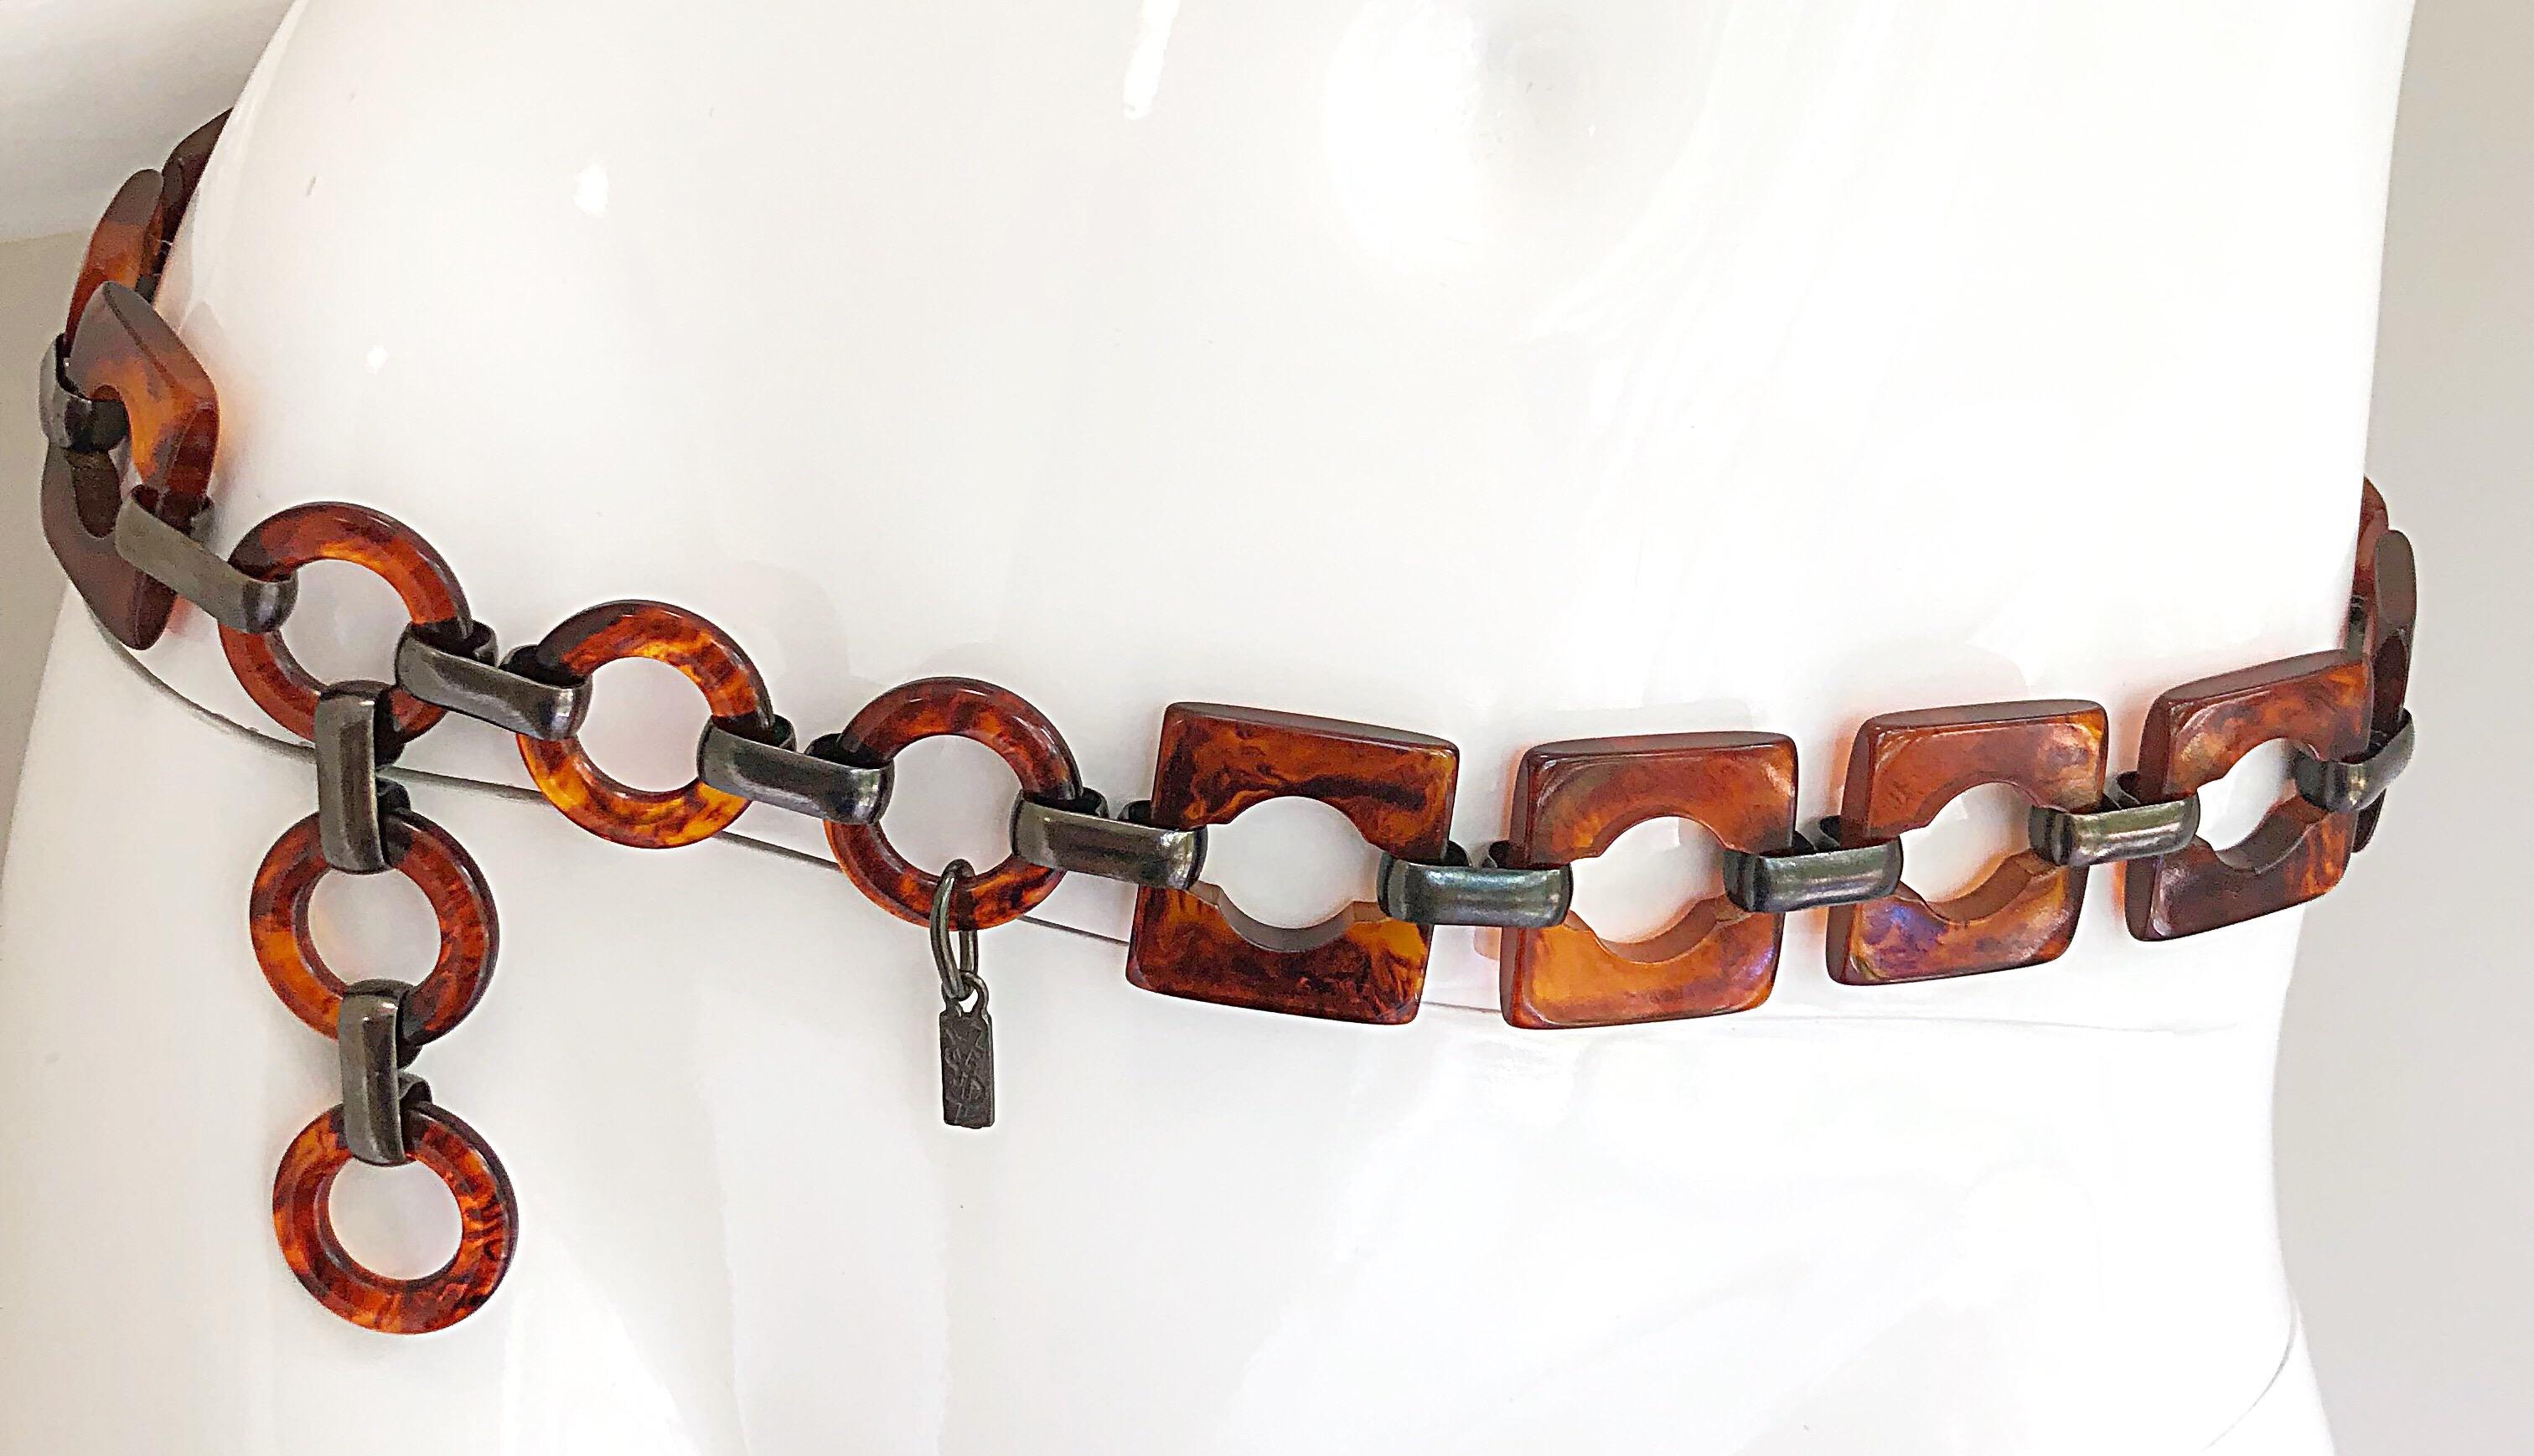 Amazing early 1970s YVES SAINT LAURENT faux tortoise shell belt or necklace! Square links mixed with circle links. Fabulous amber brown and black pattern match anything and everything. Great looped through jean belt loops, or over a dress. Also